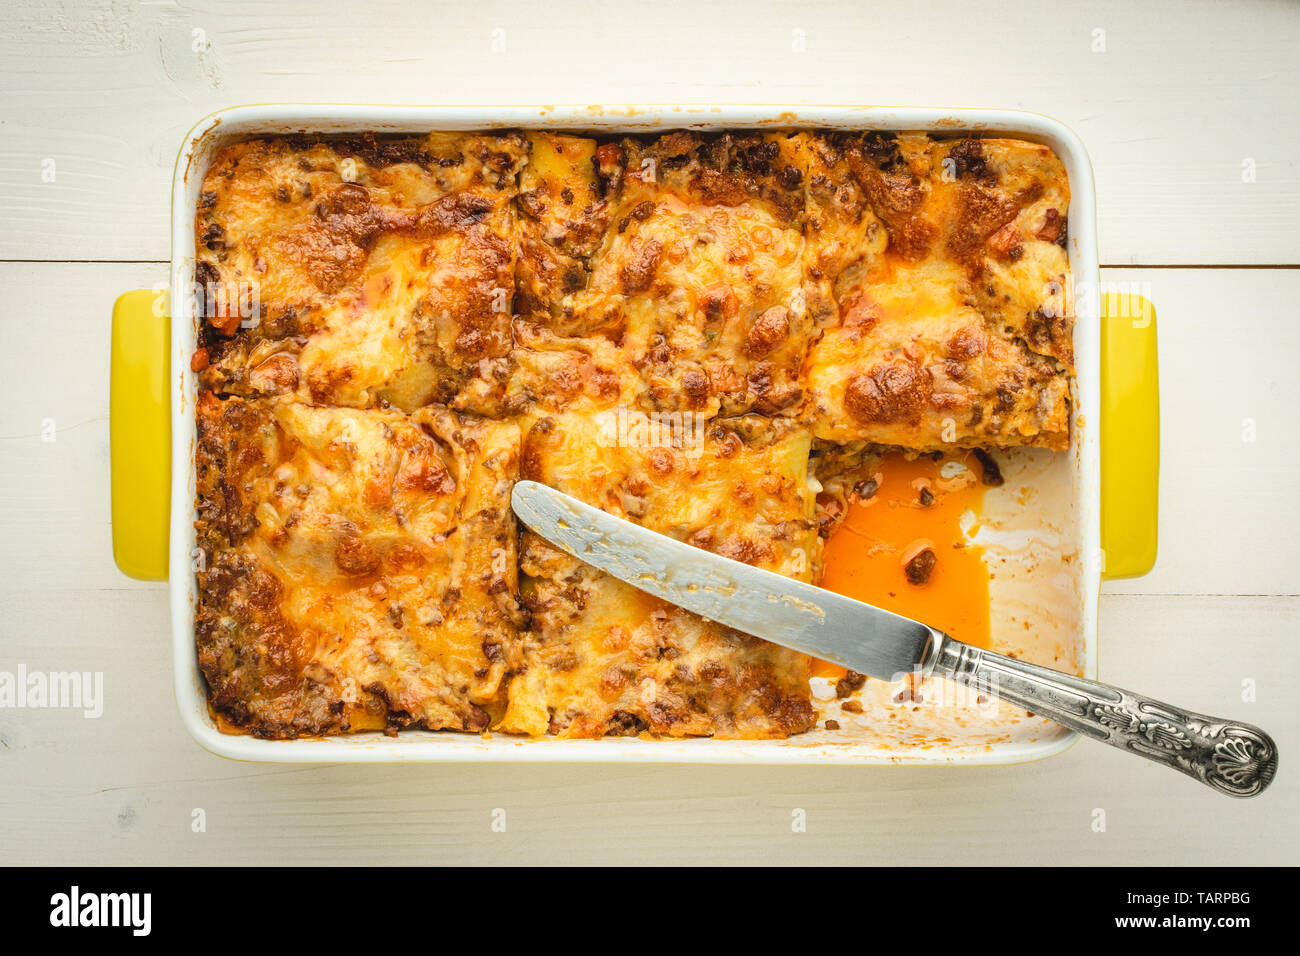 Italian Lasagna Bolognese with Beef, Cheese and Tomato Sauce on Rustic White Wooden Background Stock Photo